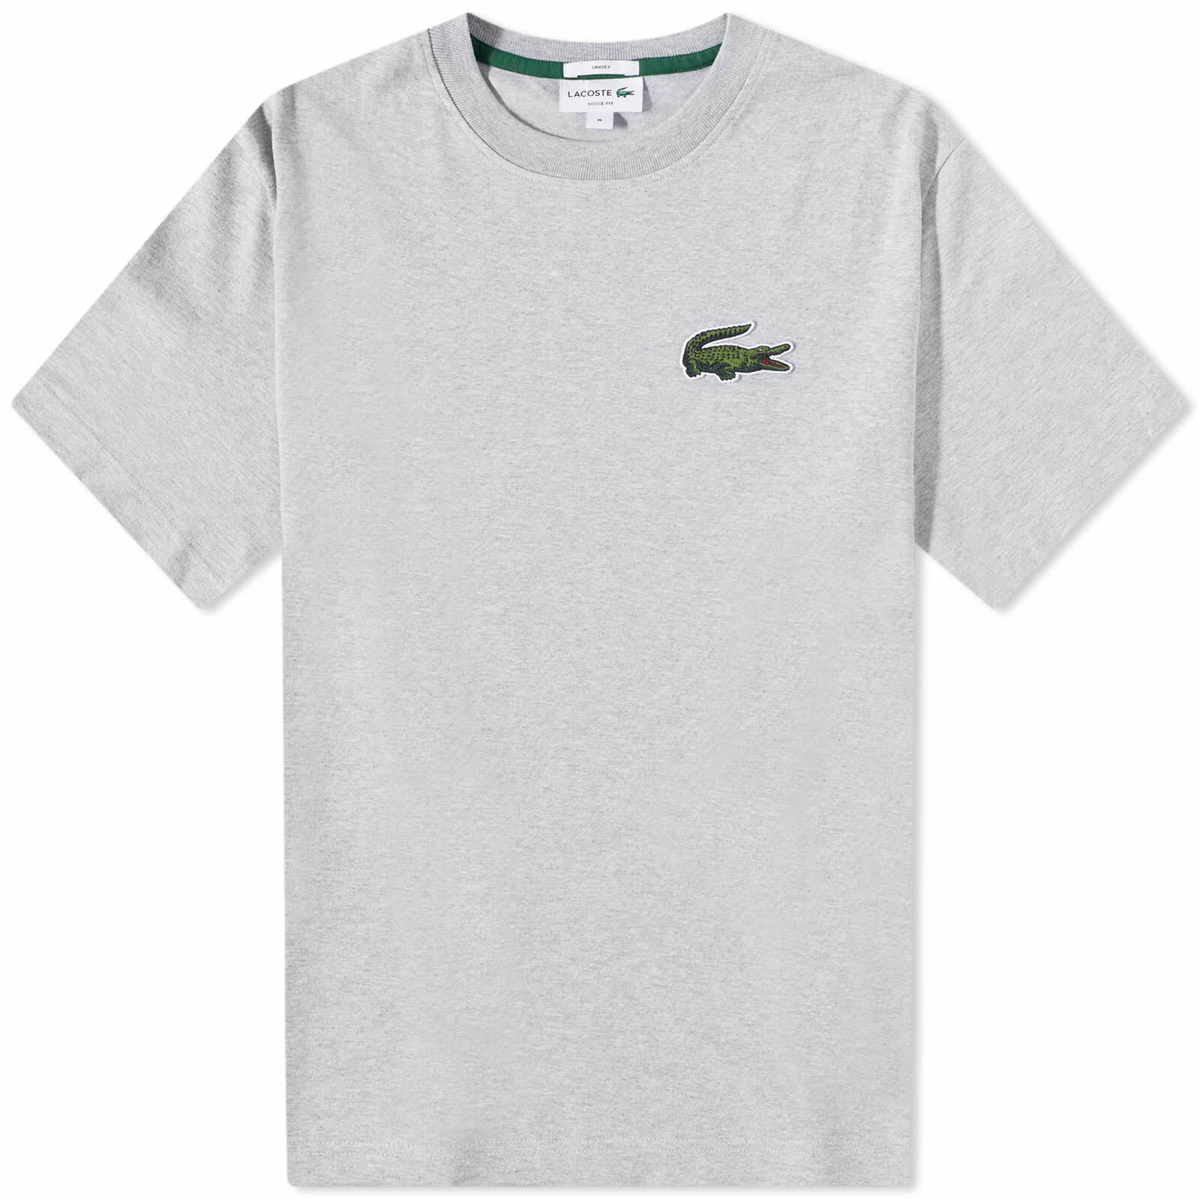 Lacoste Vintage Rugby Shirt Lacoste